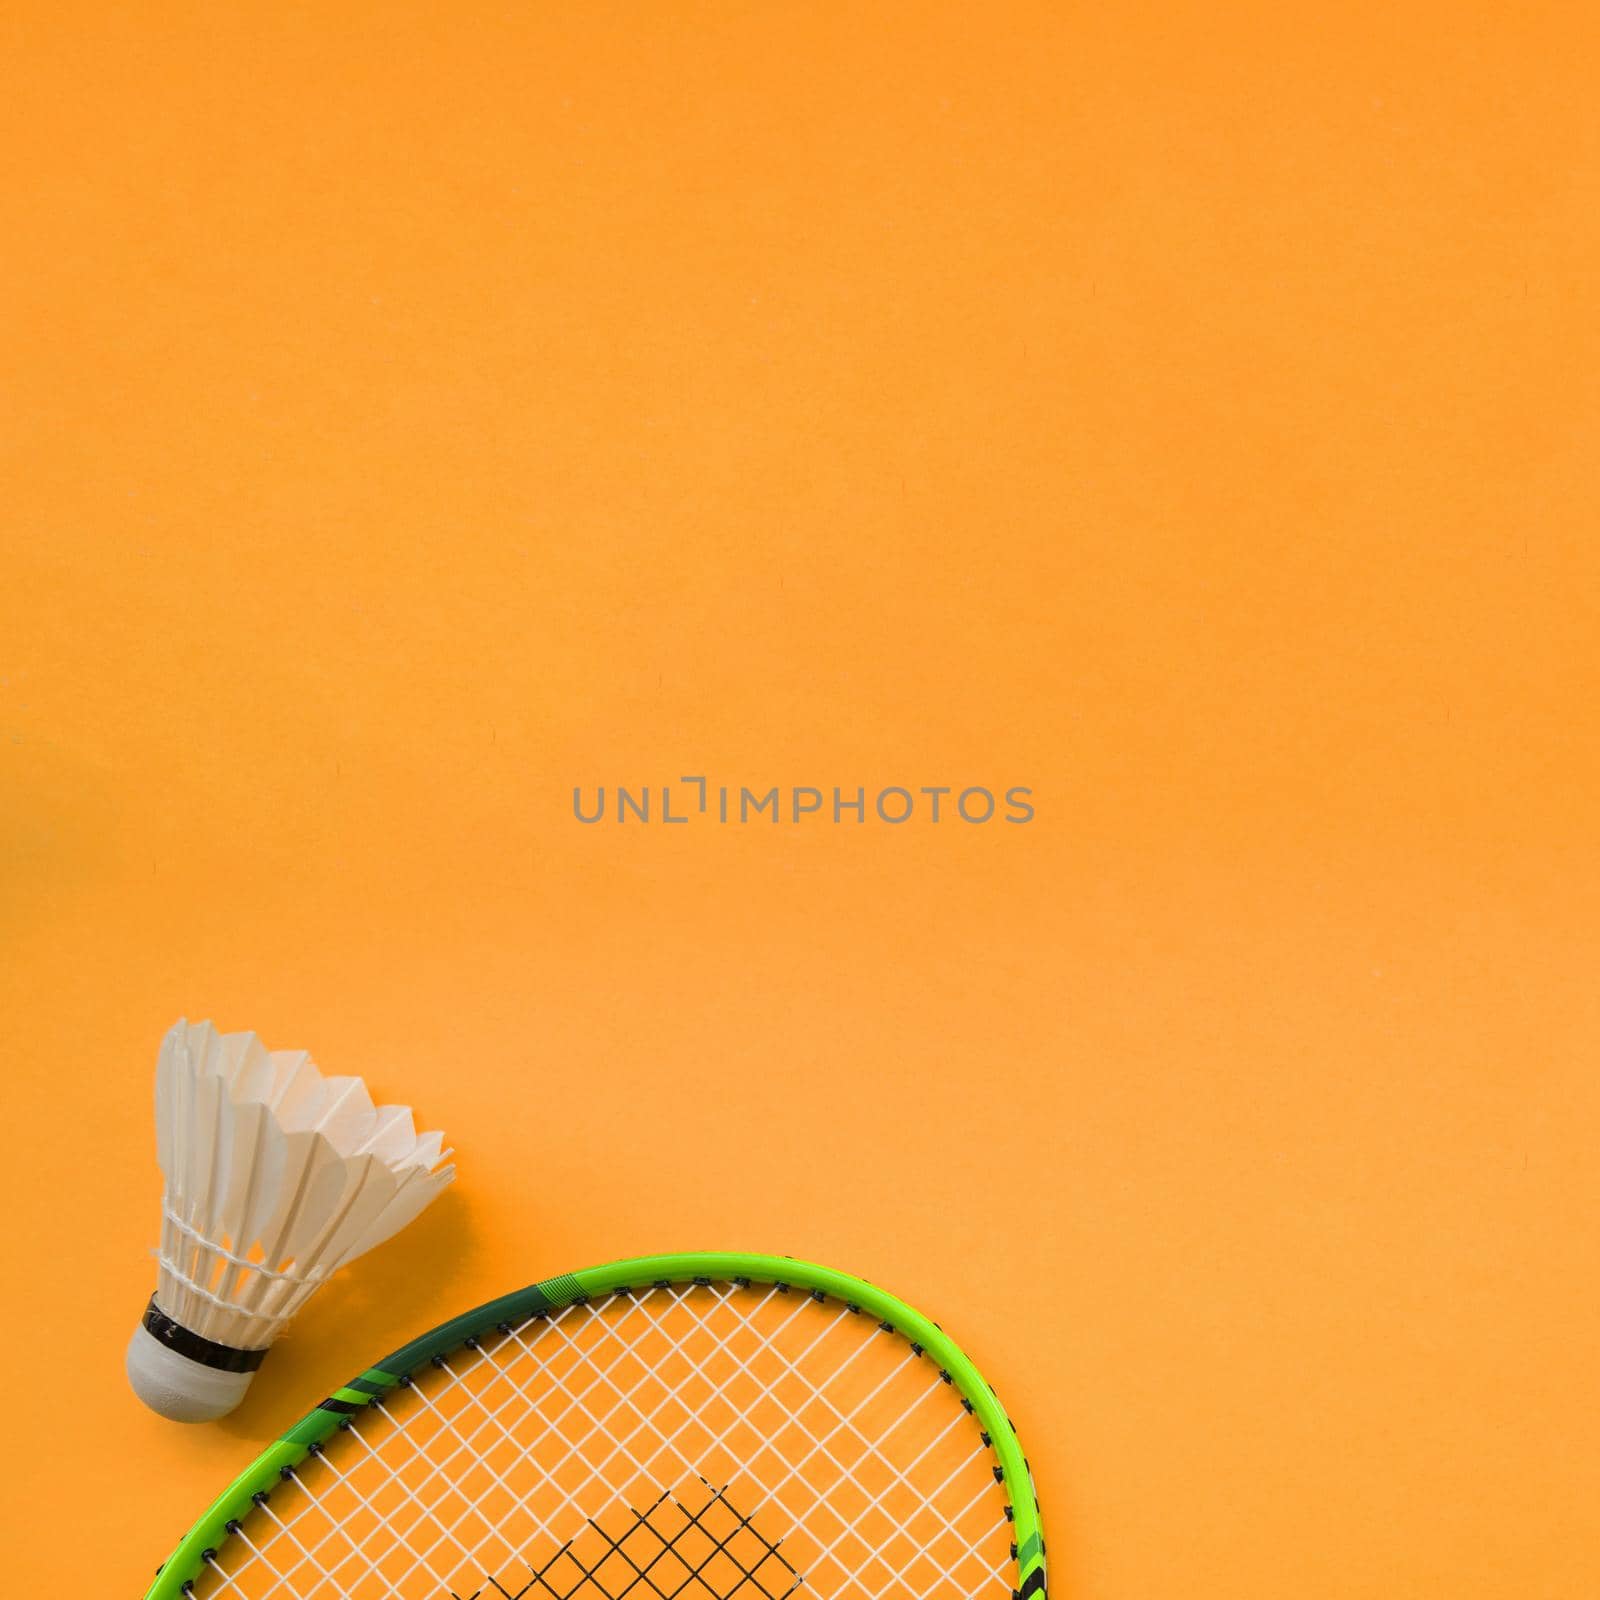 sport composition with badminton elements2. Resolution and high quality beautiful photo